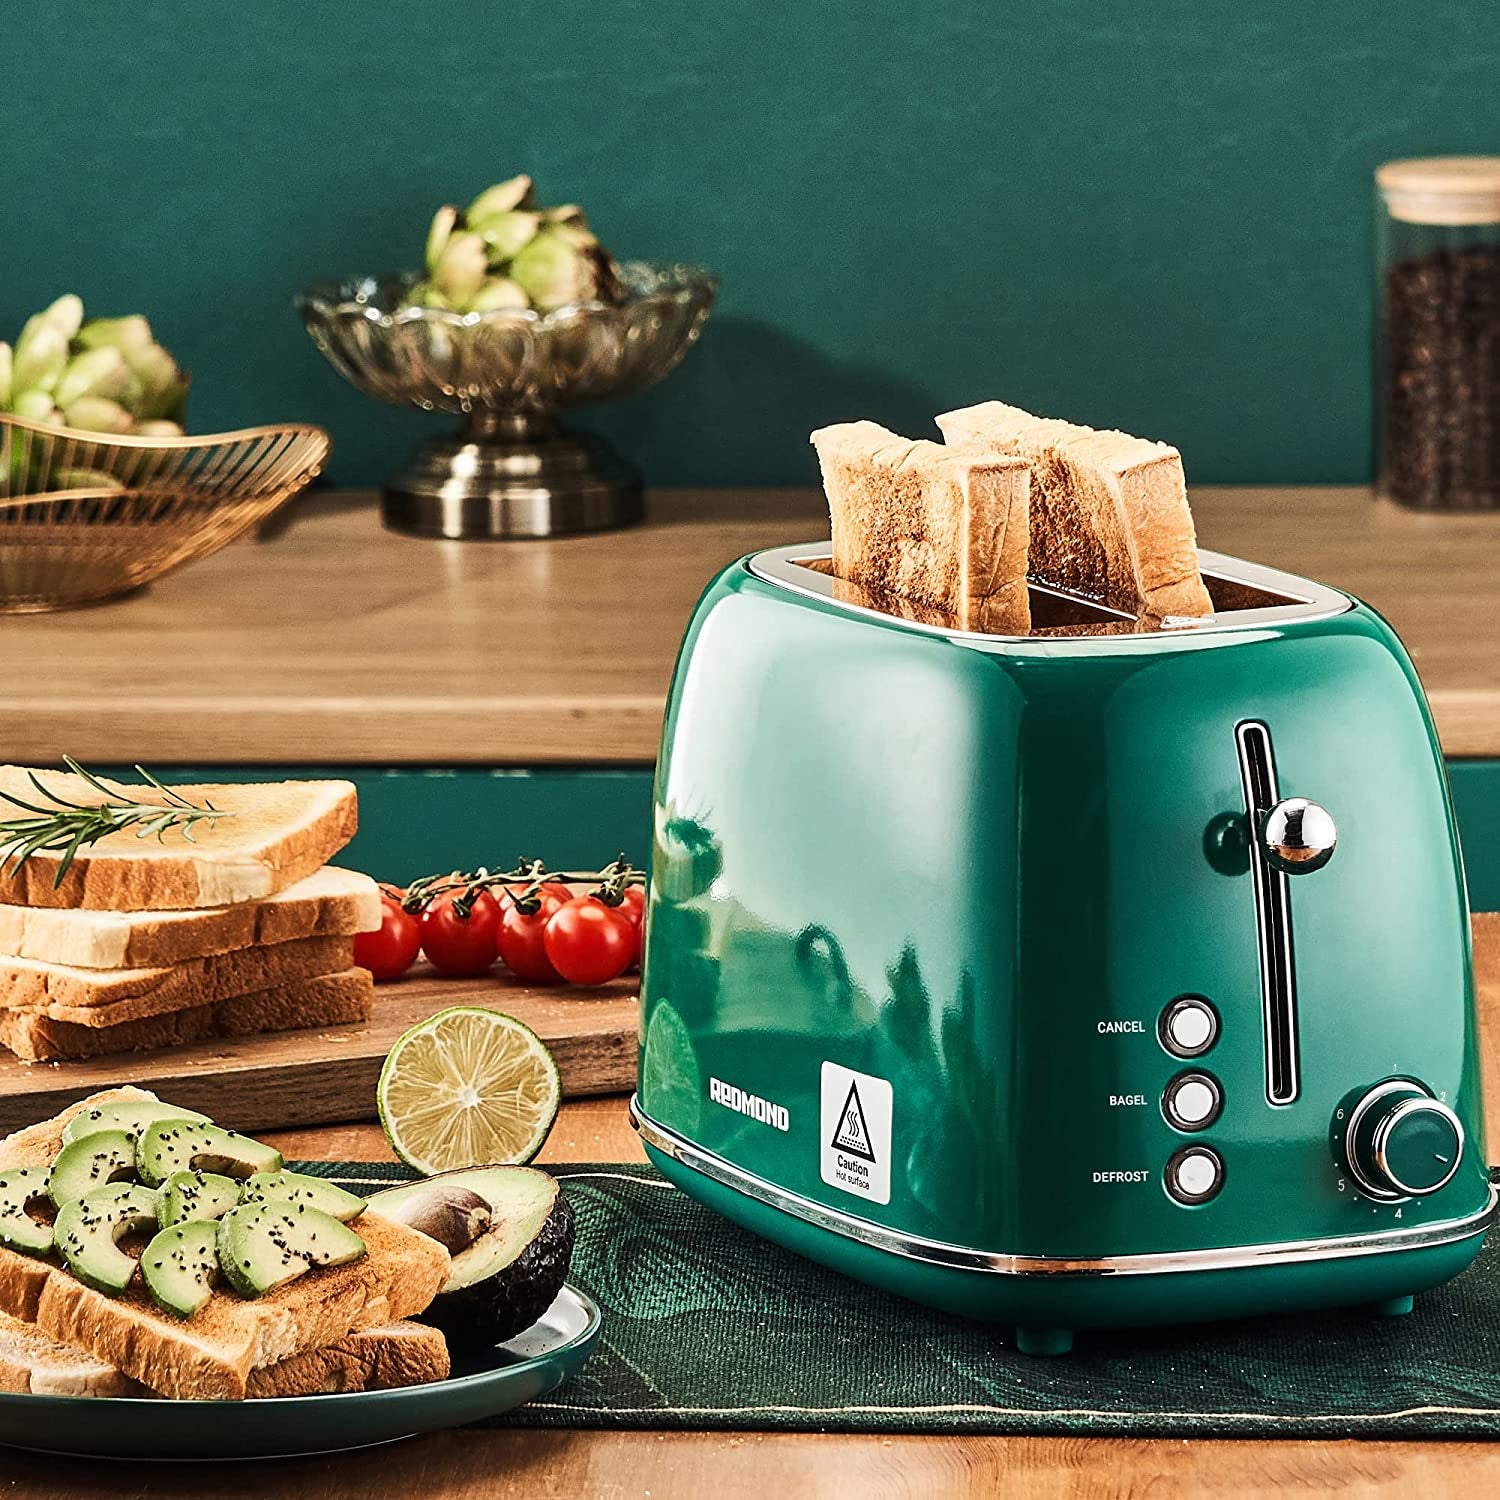 2 Slice Retro Stainless Steel Toaster with Bagel, Cancel, Defrost Function and 6 Bread Shade Settings, Extra Wide Slot, Removable Crumb Tray, Green, ST028.